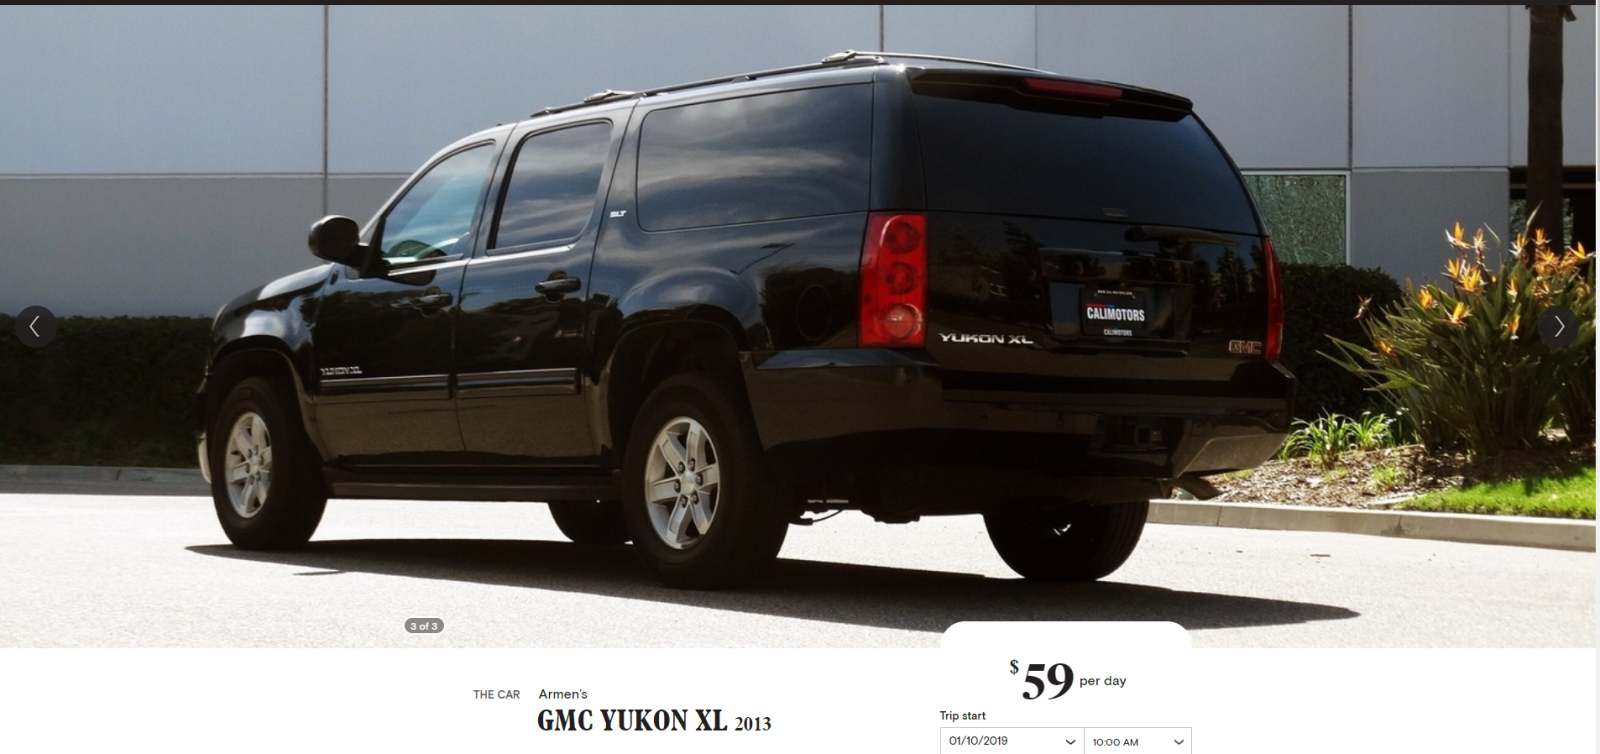 Illustration for article titled Now I am renting a GMC Yukon XL instead, typical Turo problems..